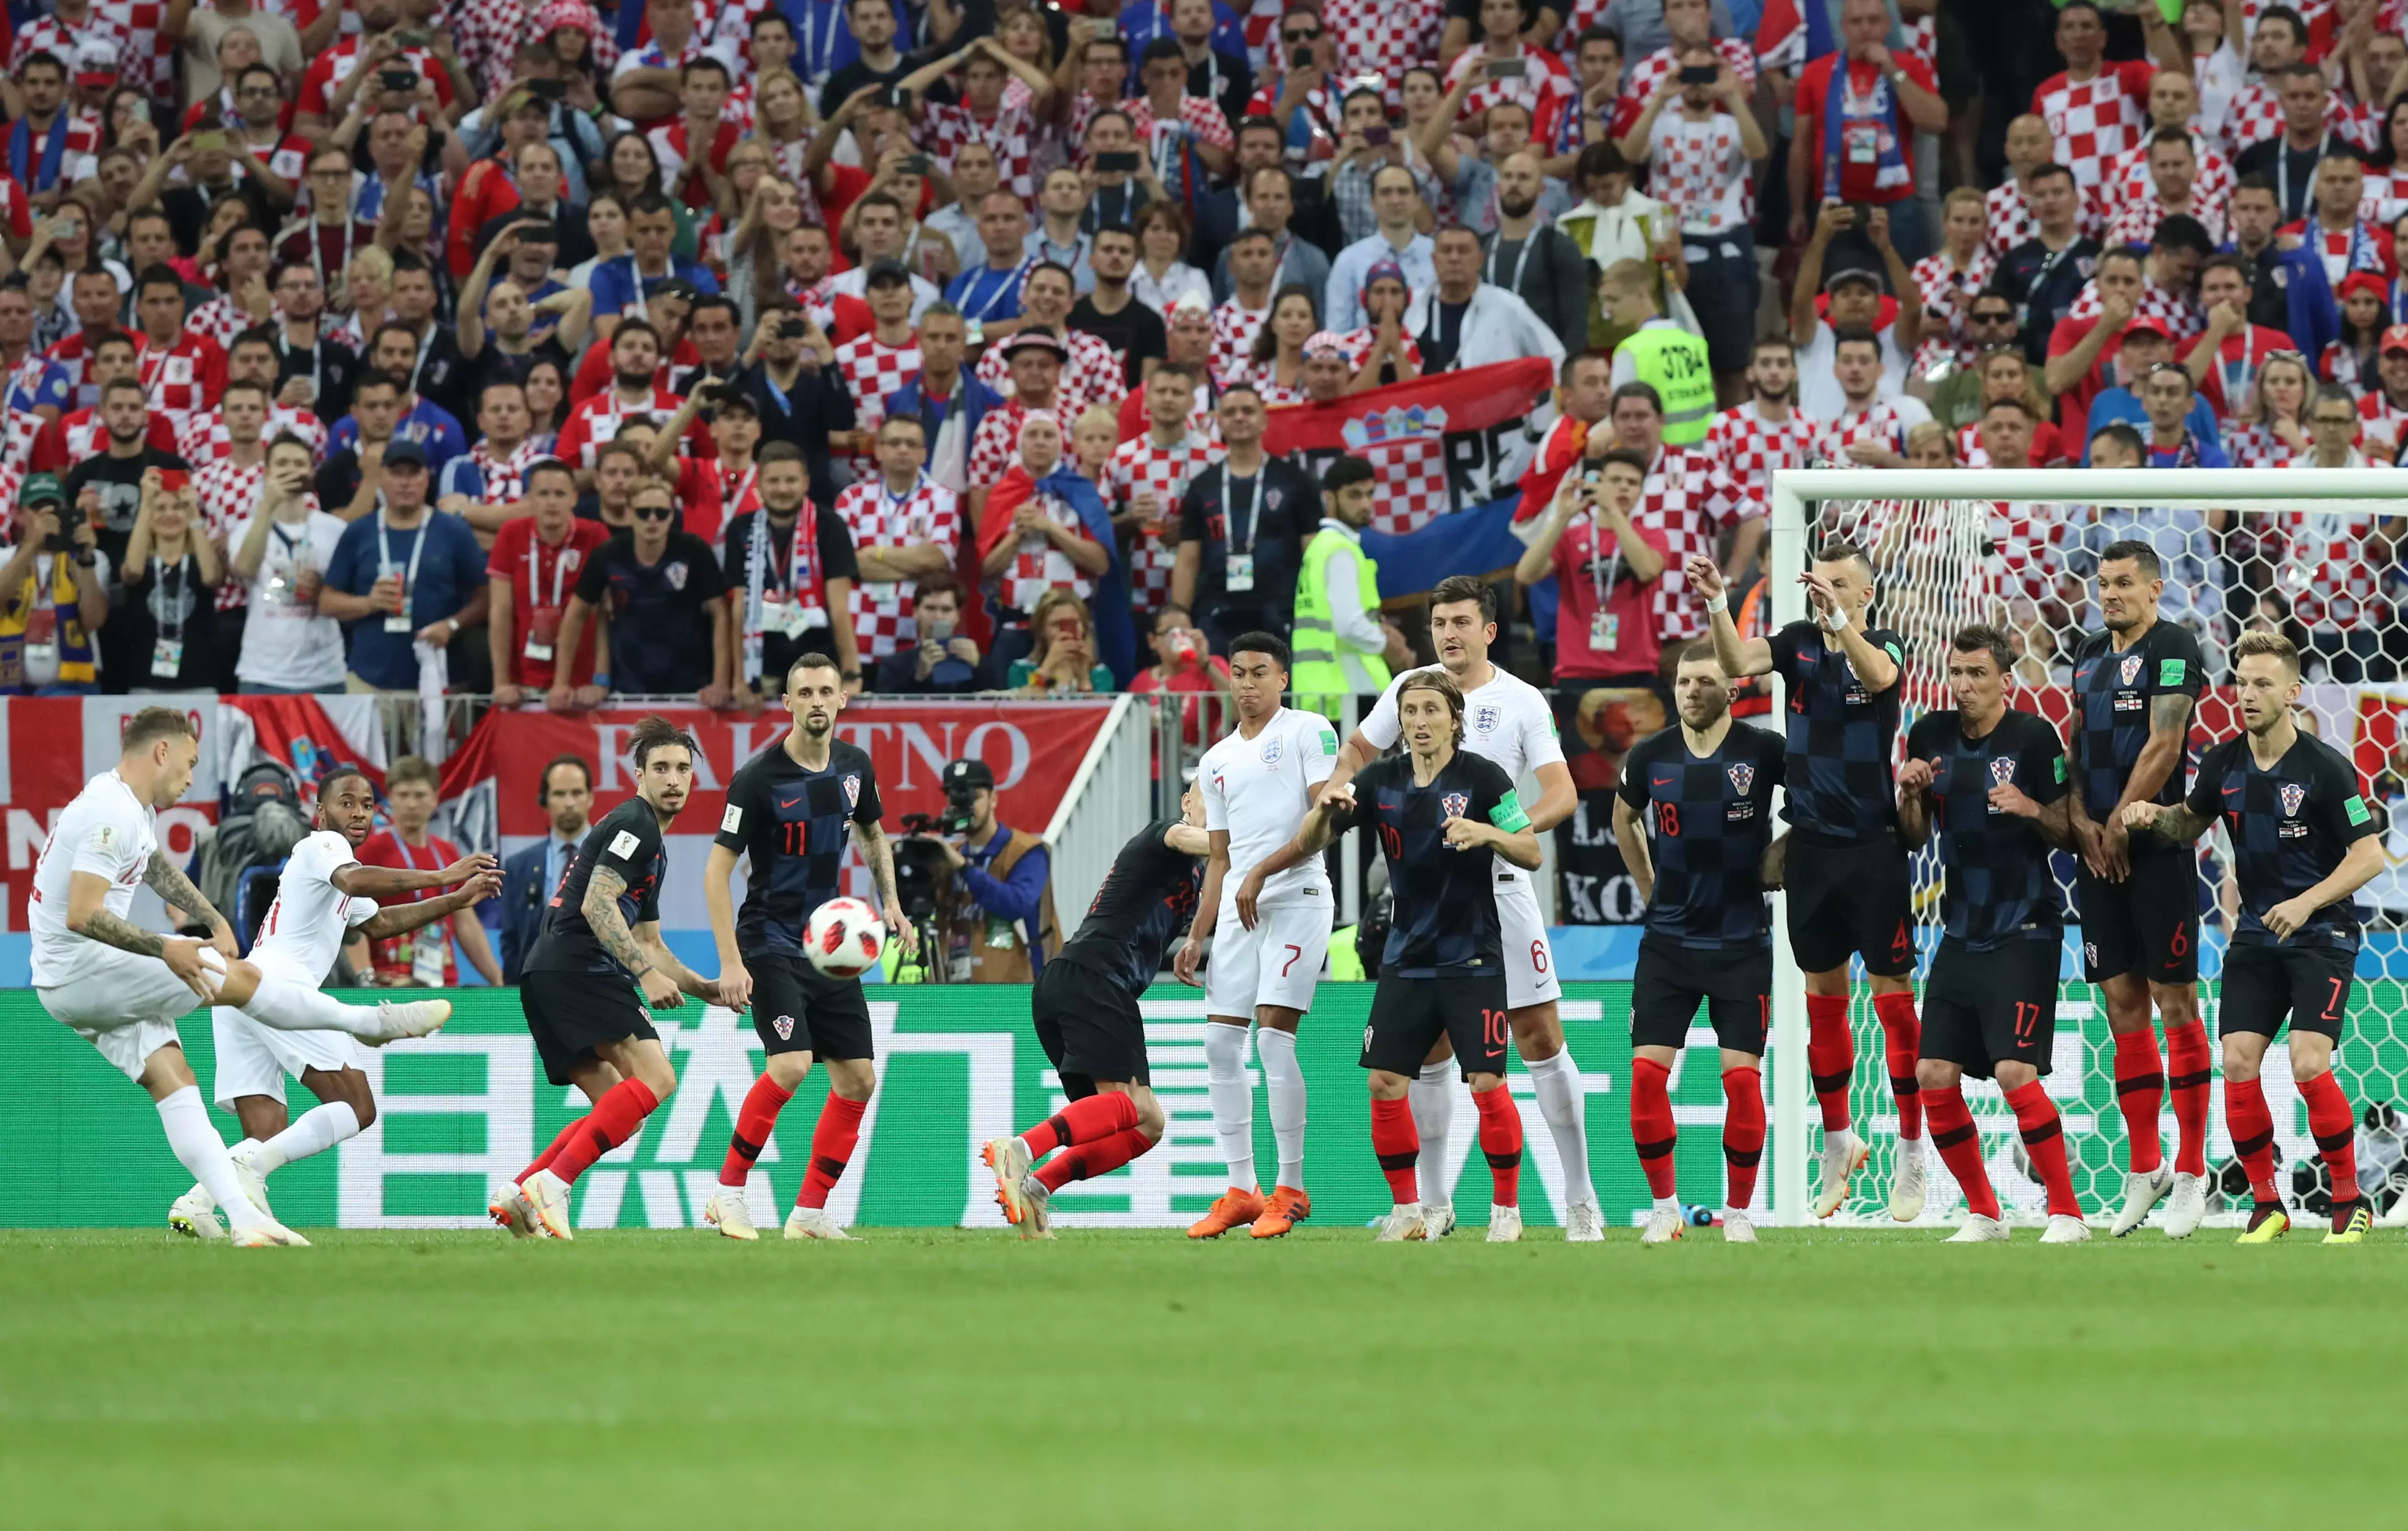 Kieran Tripper fired England into an early lead against Croatia in the 2018 World Cup before losing in extra-time